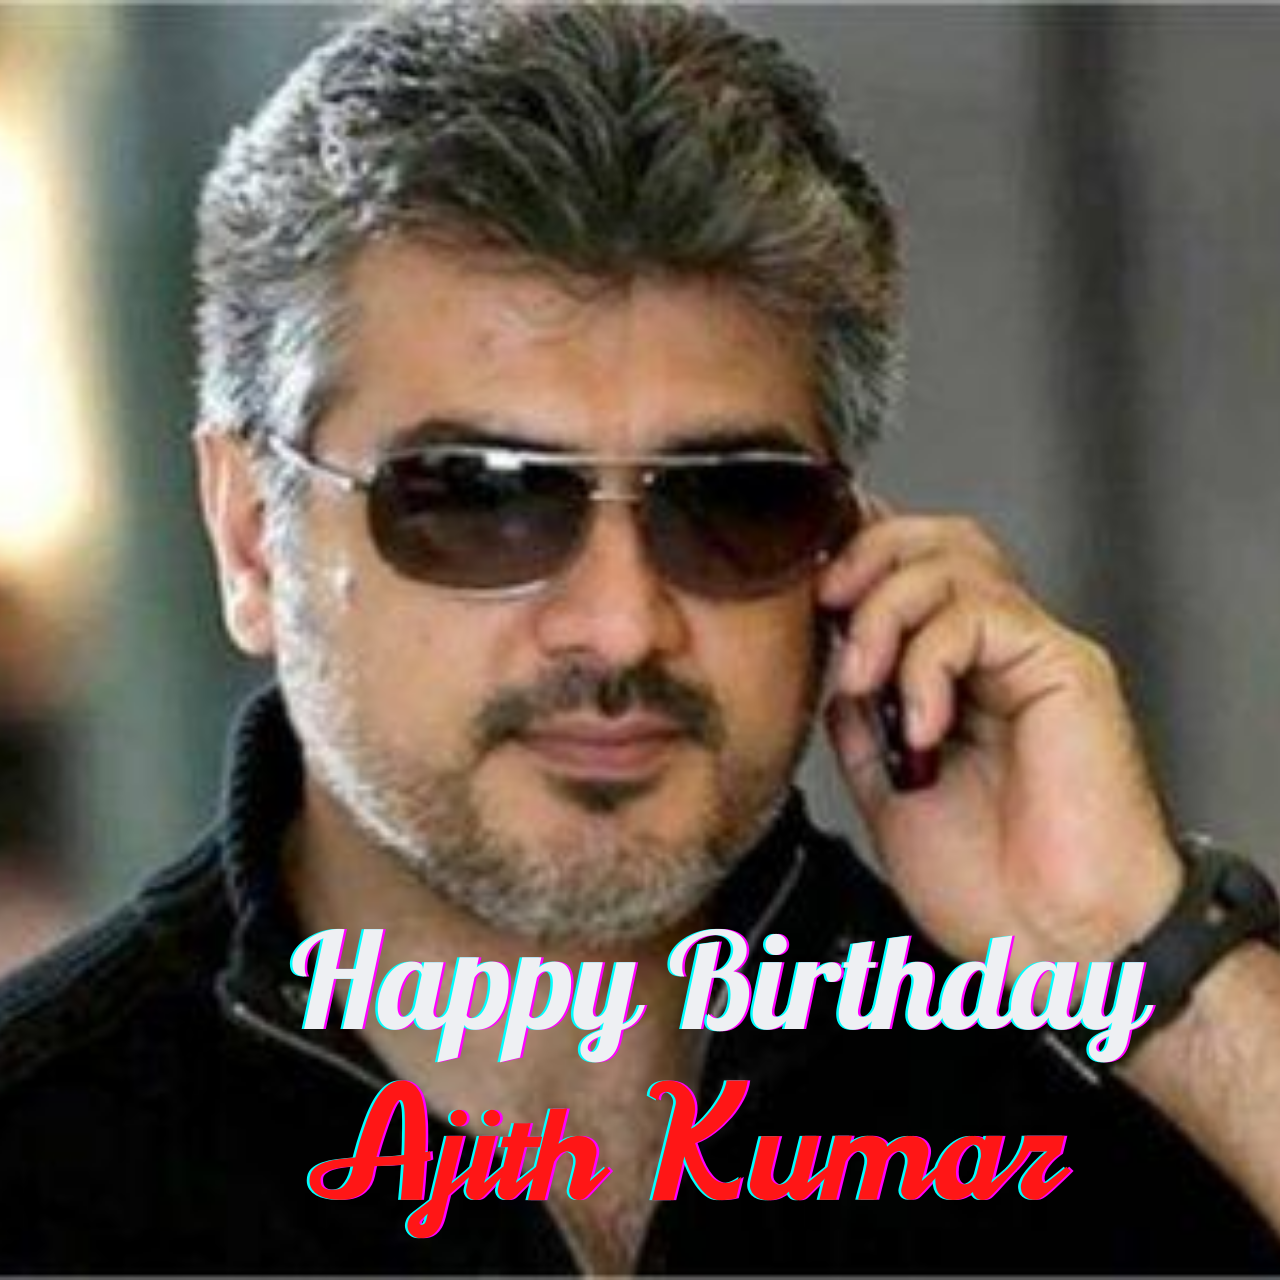 Happy Birthday Ajith Kumar Wishes, Images (Photos), and Quotes to share with Thala